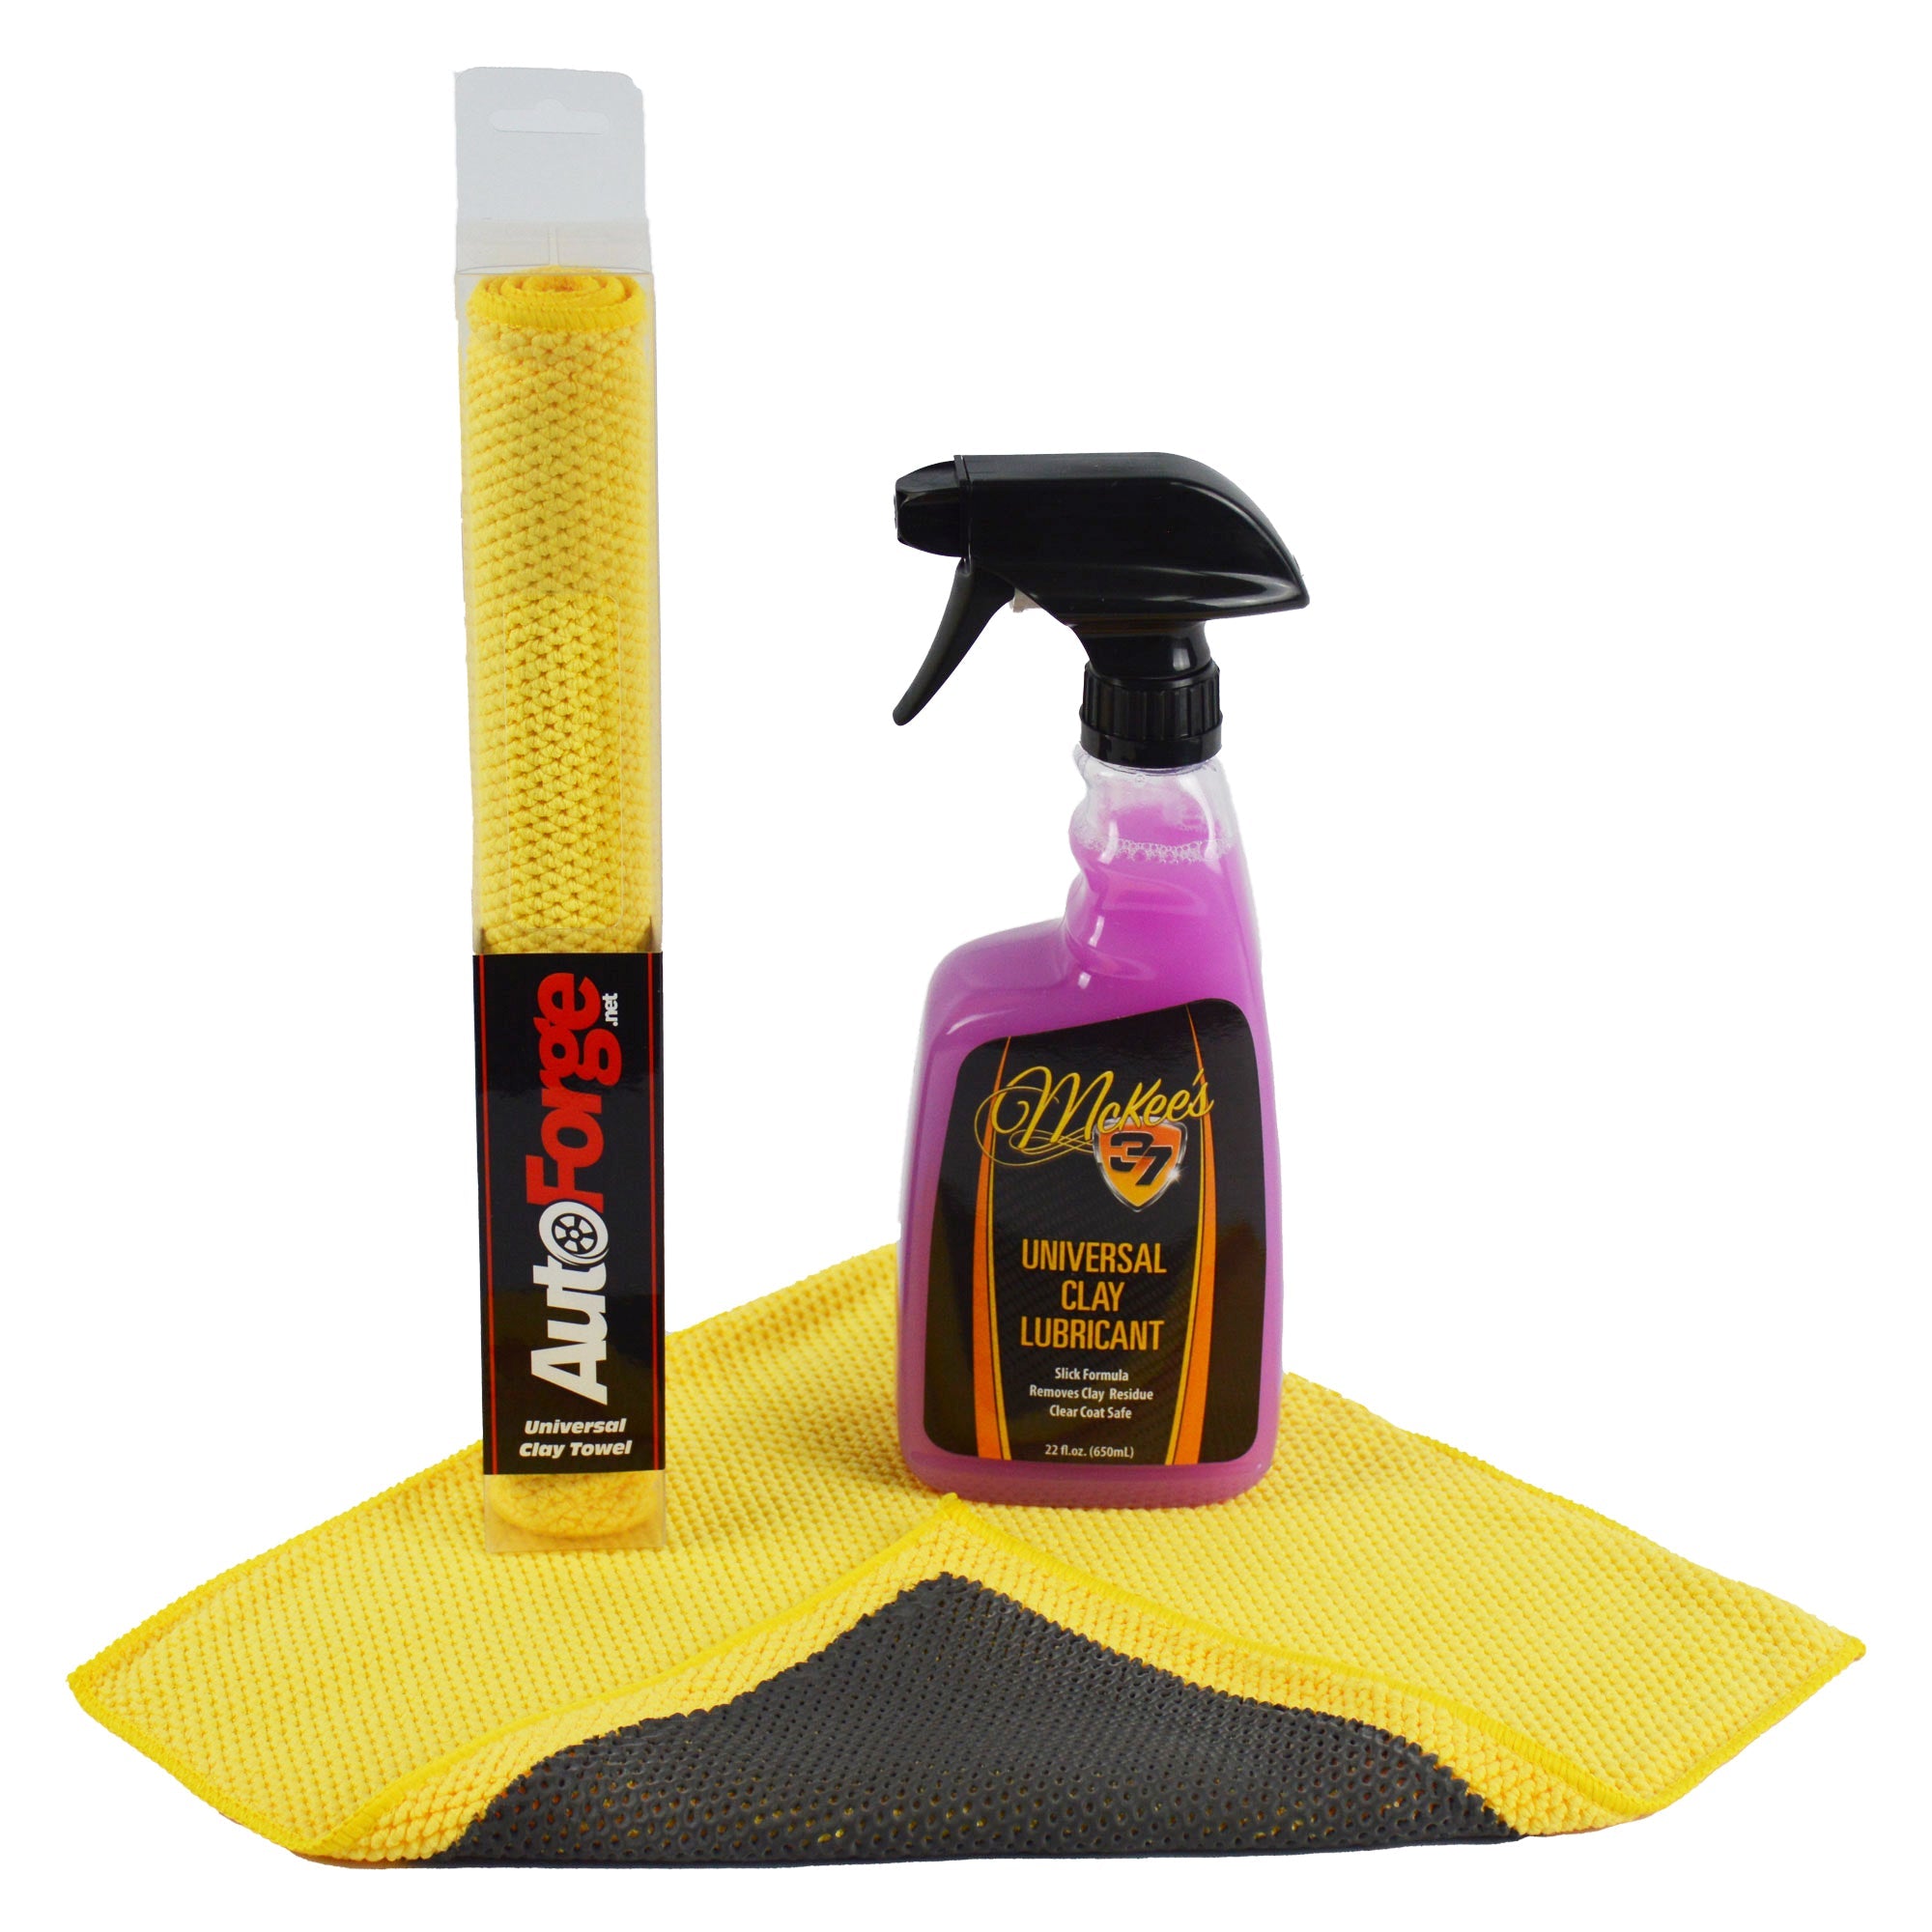 Autoforge Universal Clay Towel & Lubricant Combo